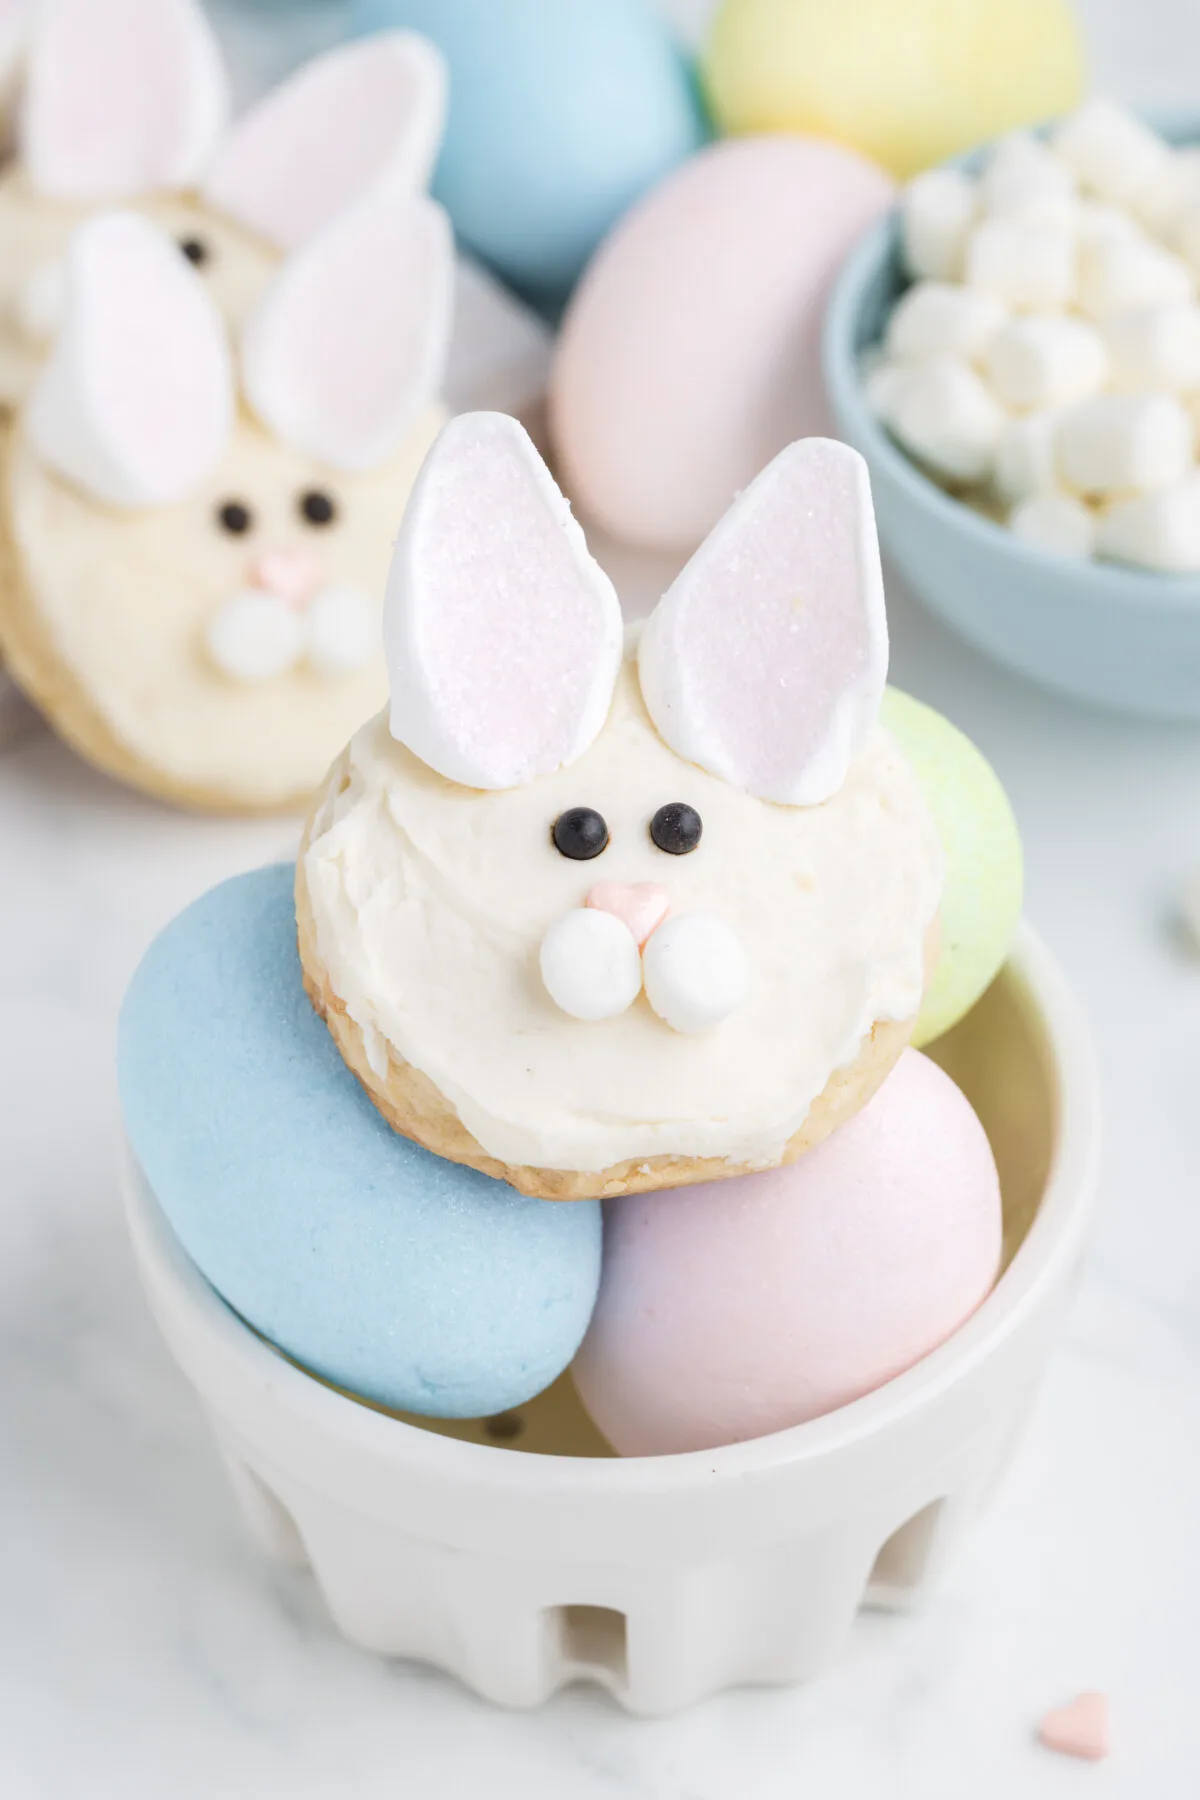 Bring a smile to your children's' faces with this easy and fun recipe for Bunny Face cookies - perfect for Easter, birthdays or just because!